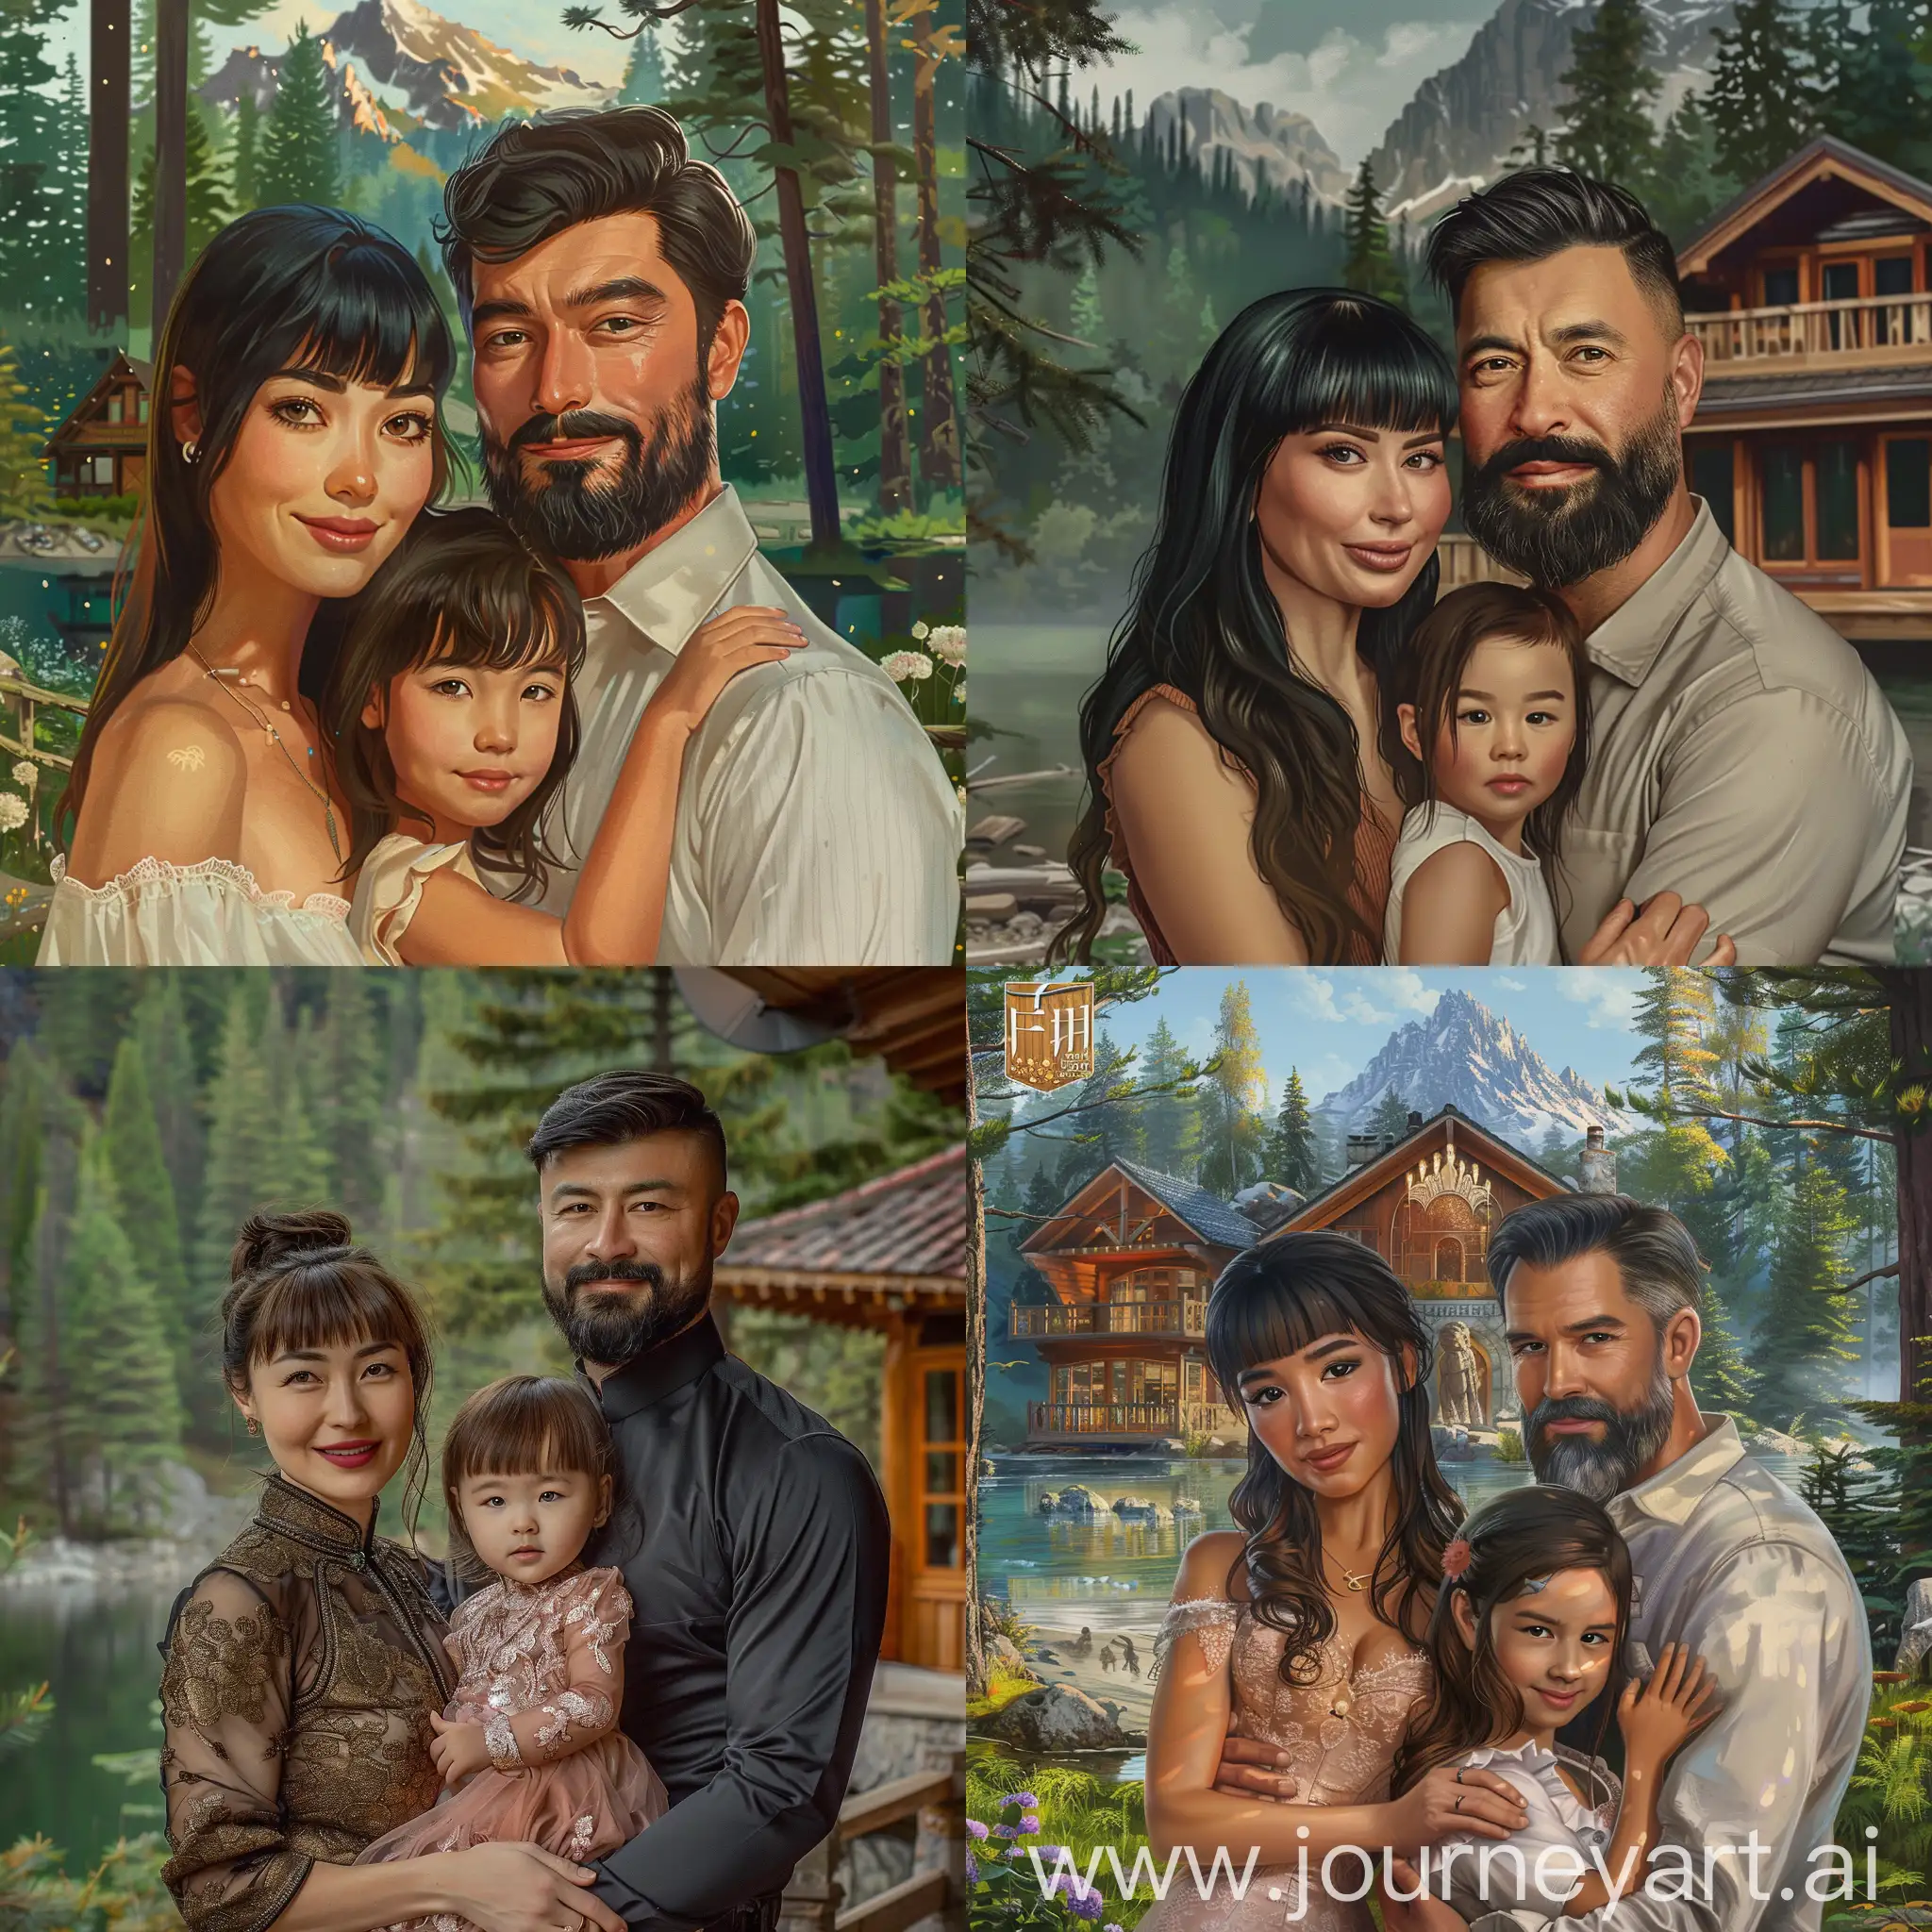 make me a picture of a kazakh asian woman with a bang and portuguese man with beard and moustache couple and their daughter in a beautiful house near the forest and lake